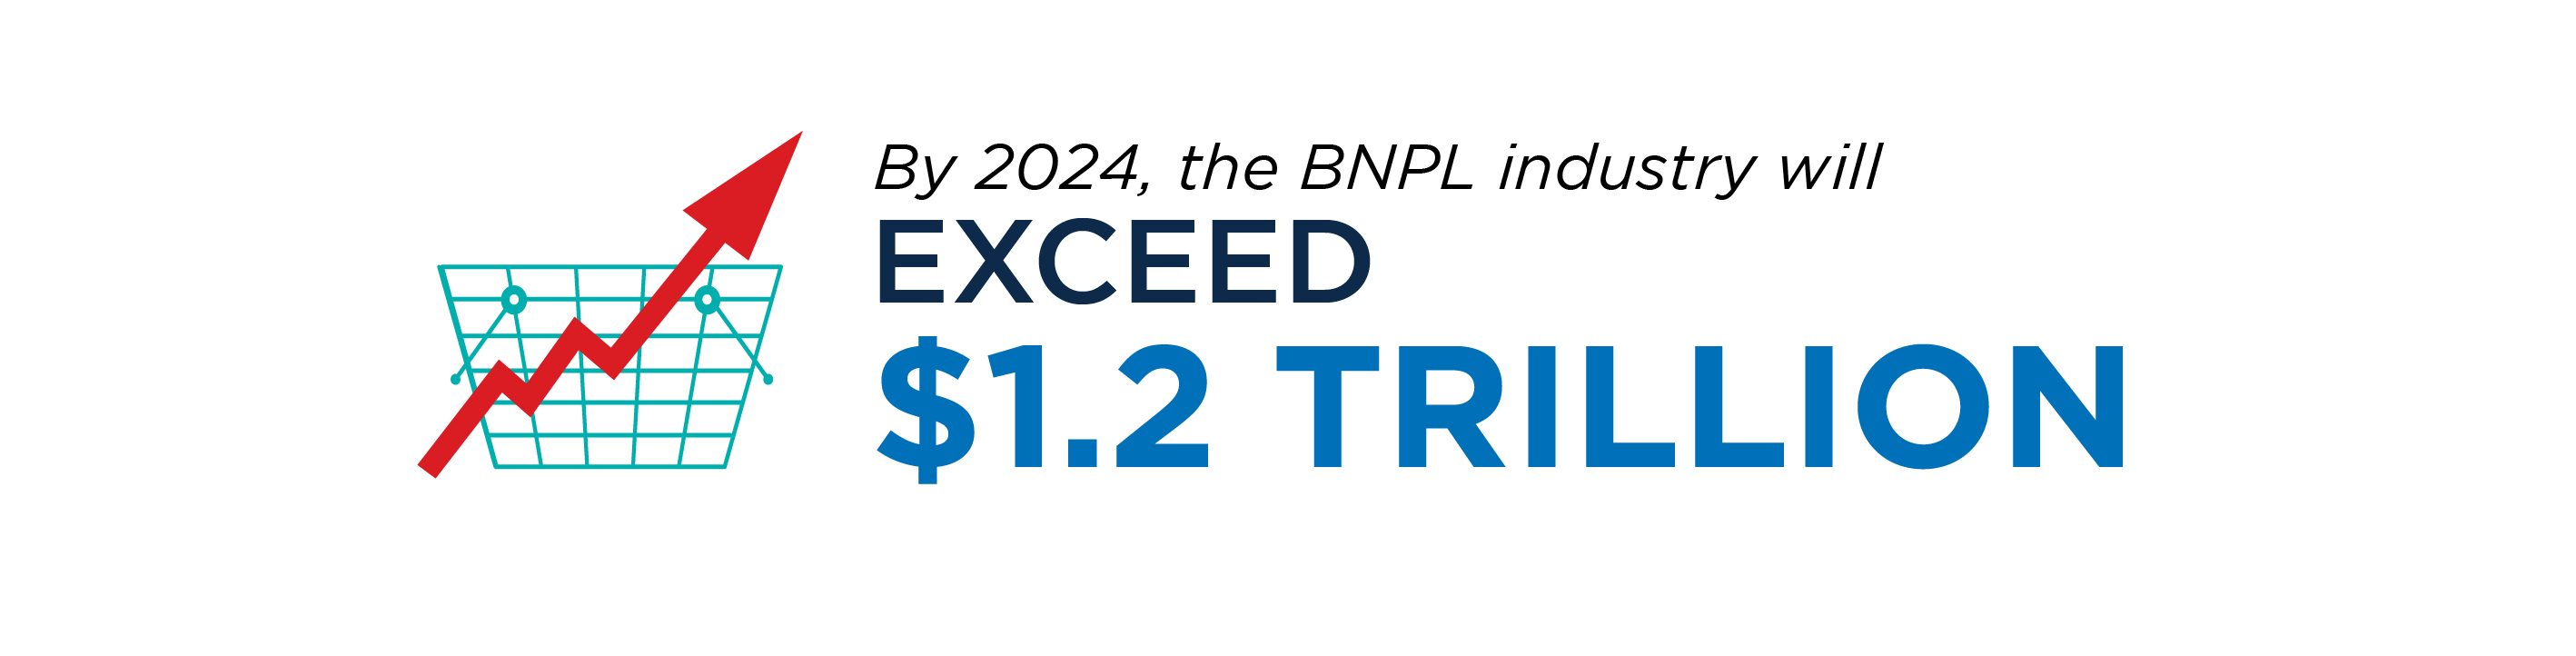 The BNPL industry will exceed $1.2 trillion by next year (2024)